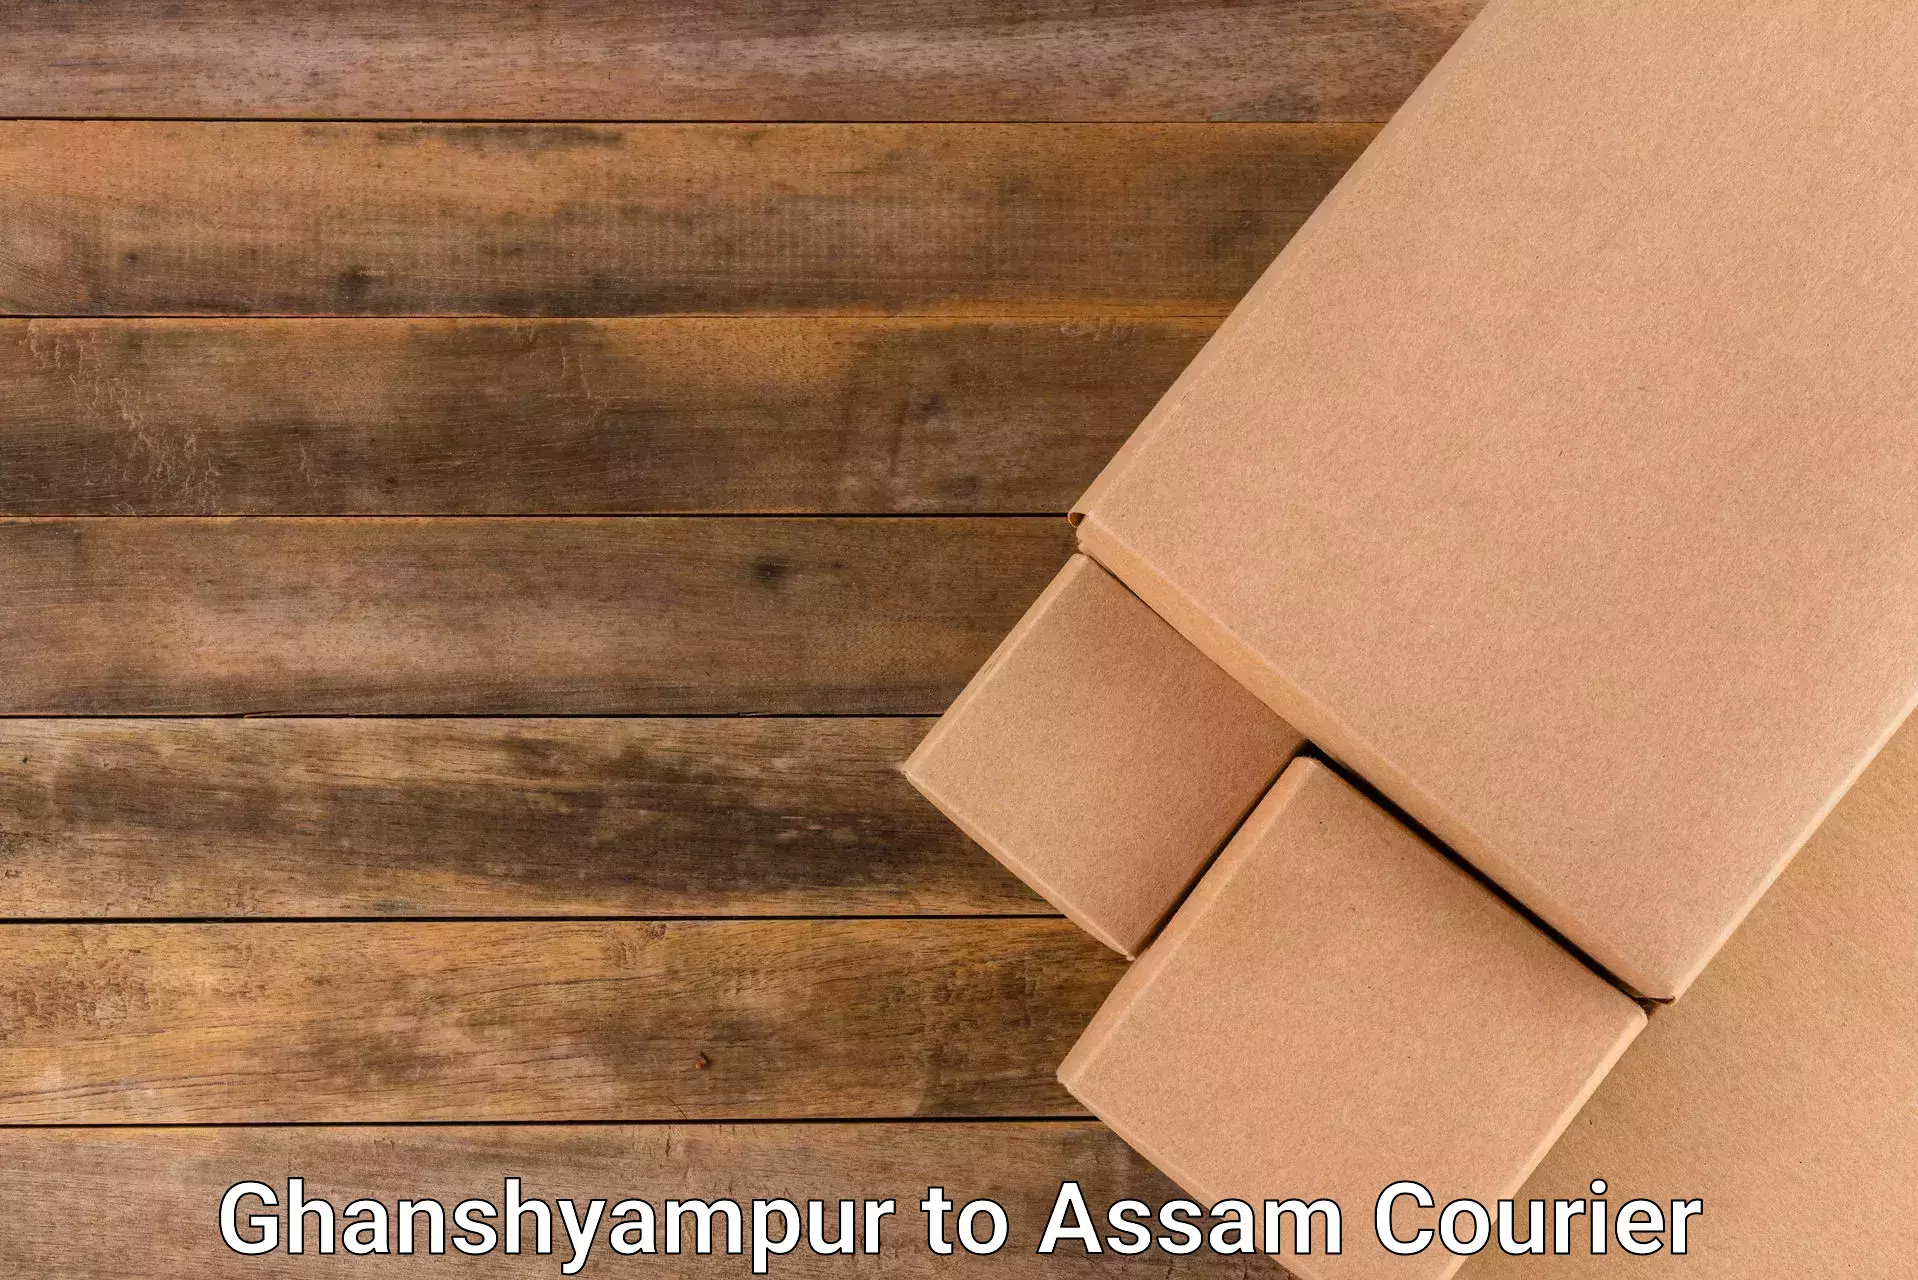 Reliable parcel services in Ghanshyampur to Silchar